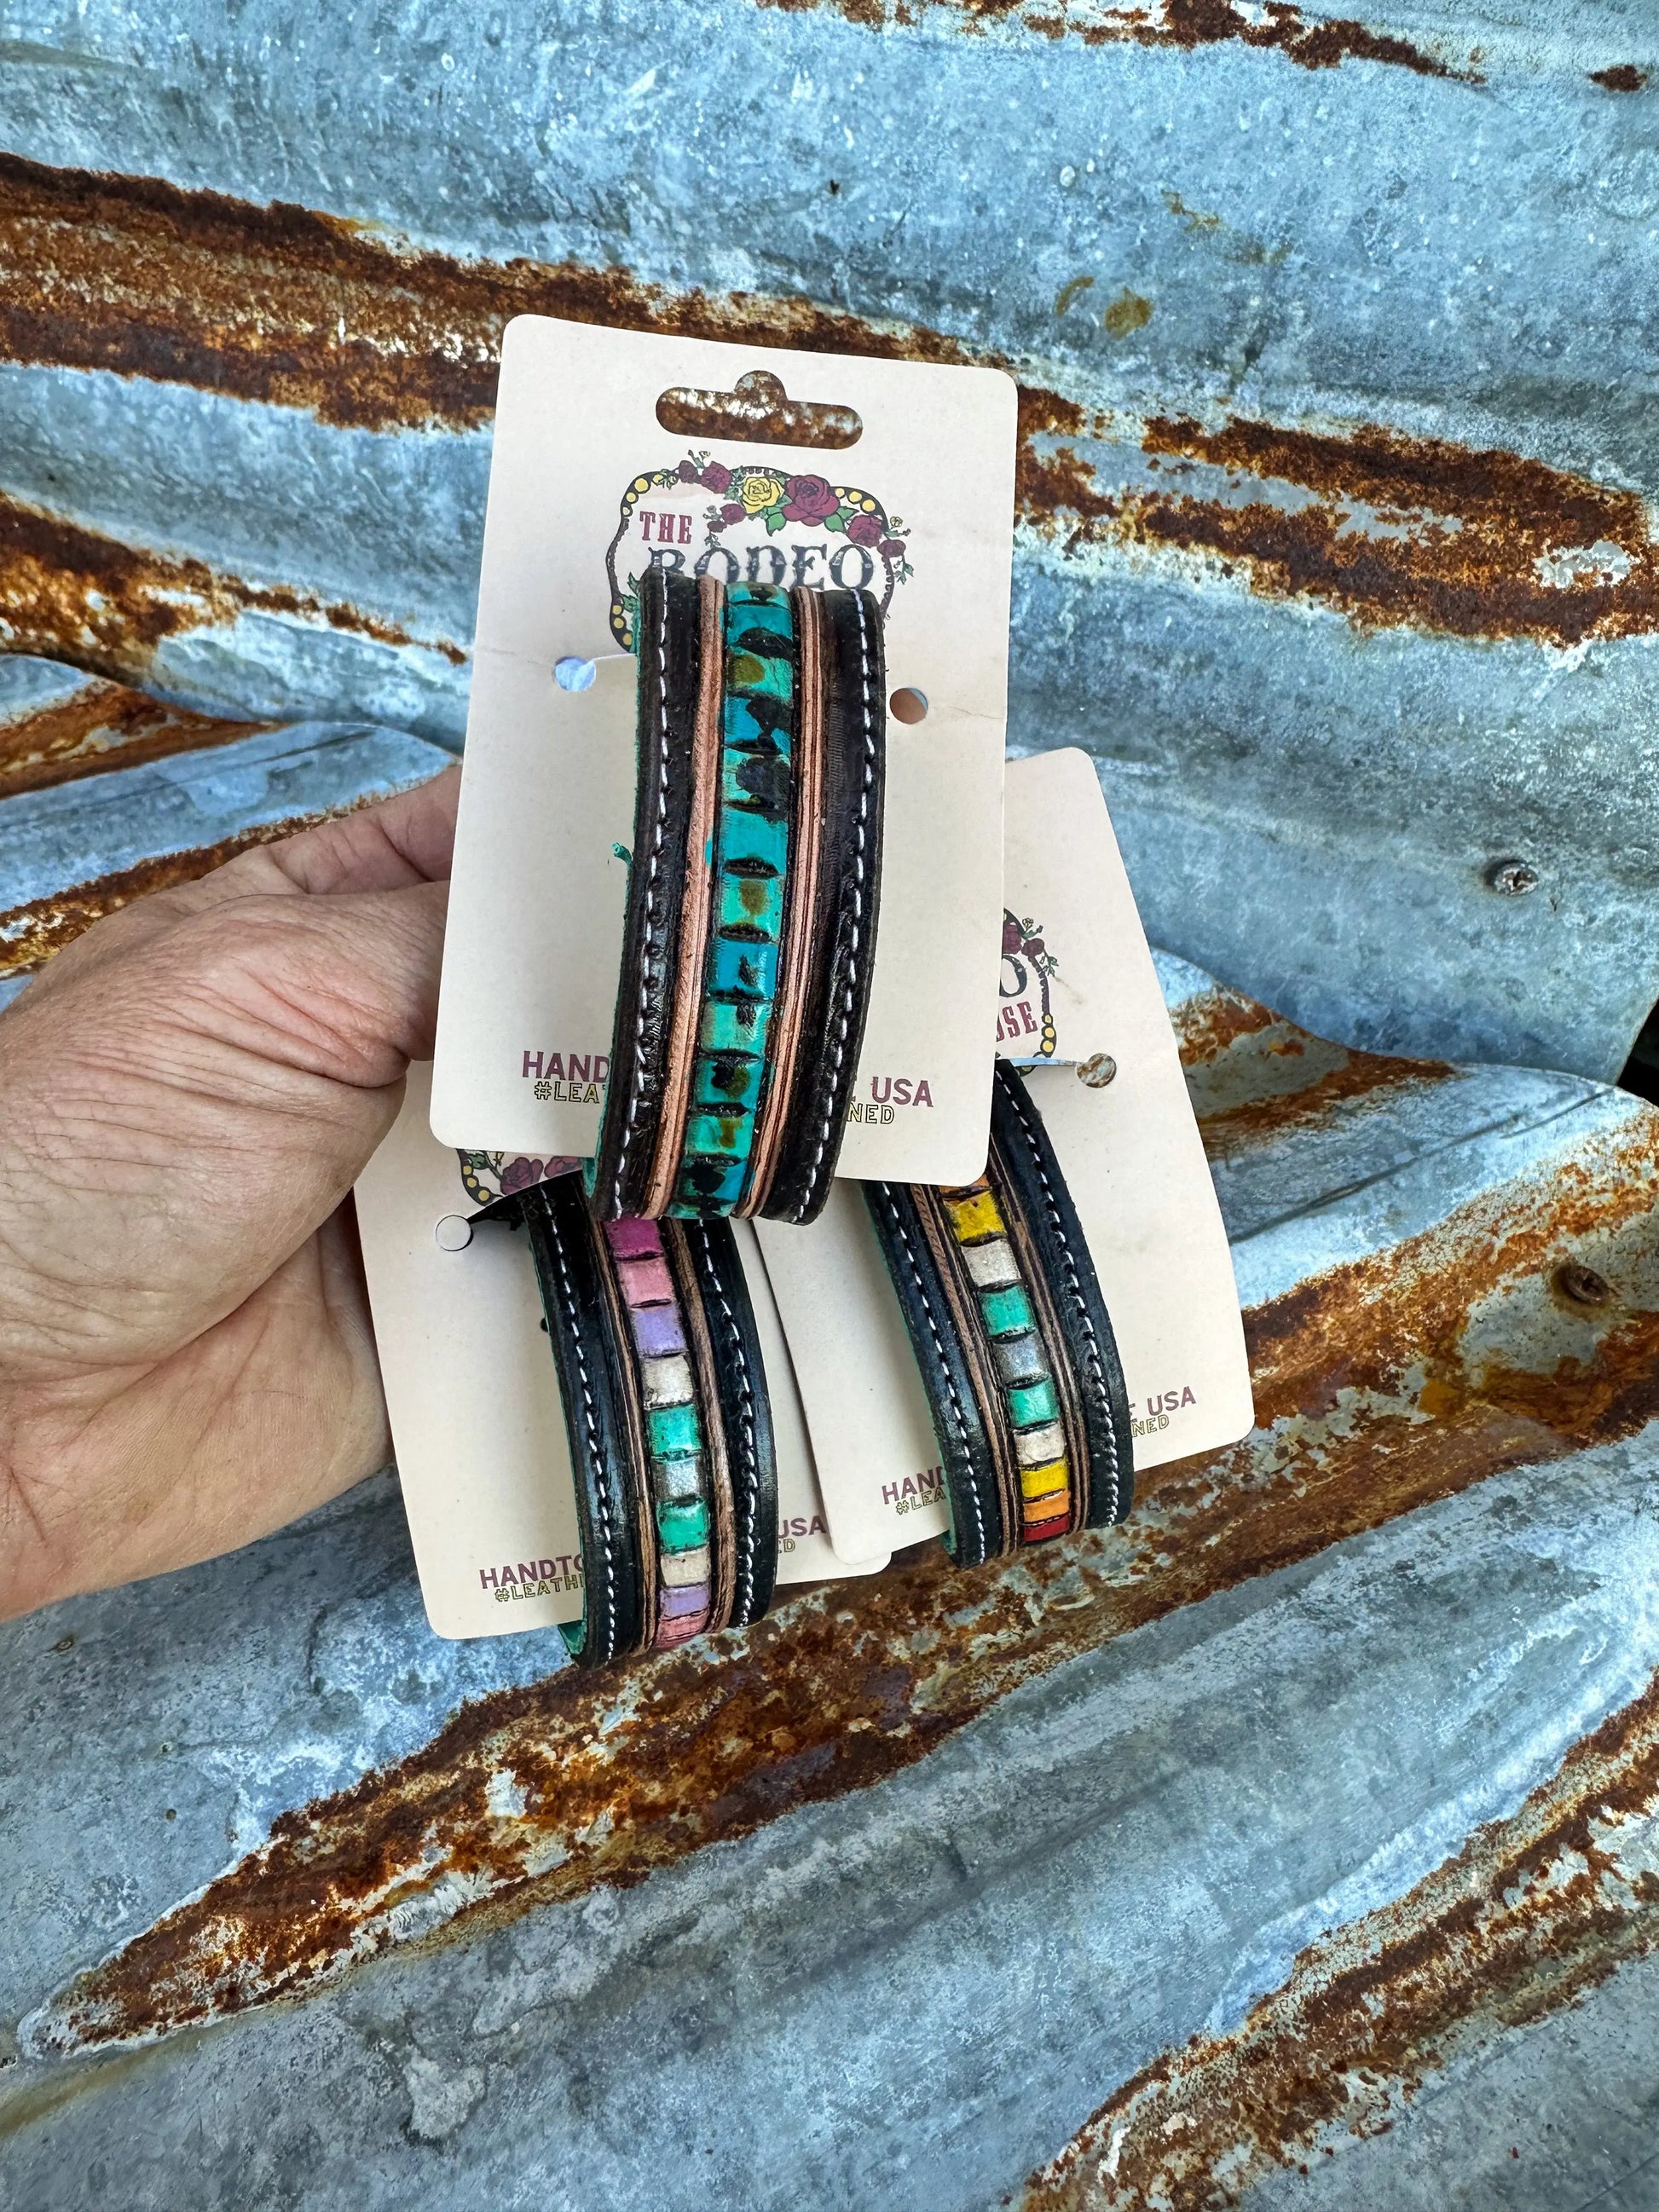 Beaded Turquoise Tooled Cuff The Rodeo Rose